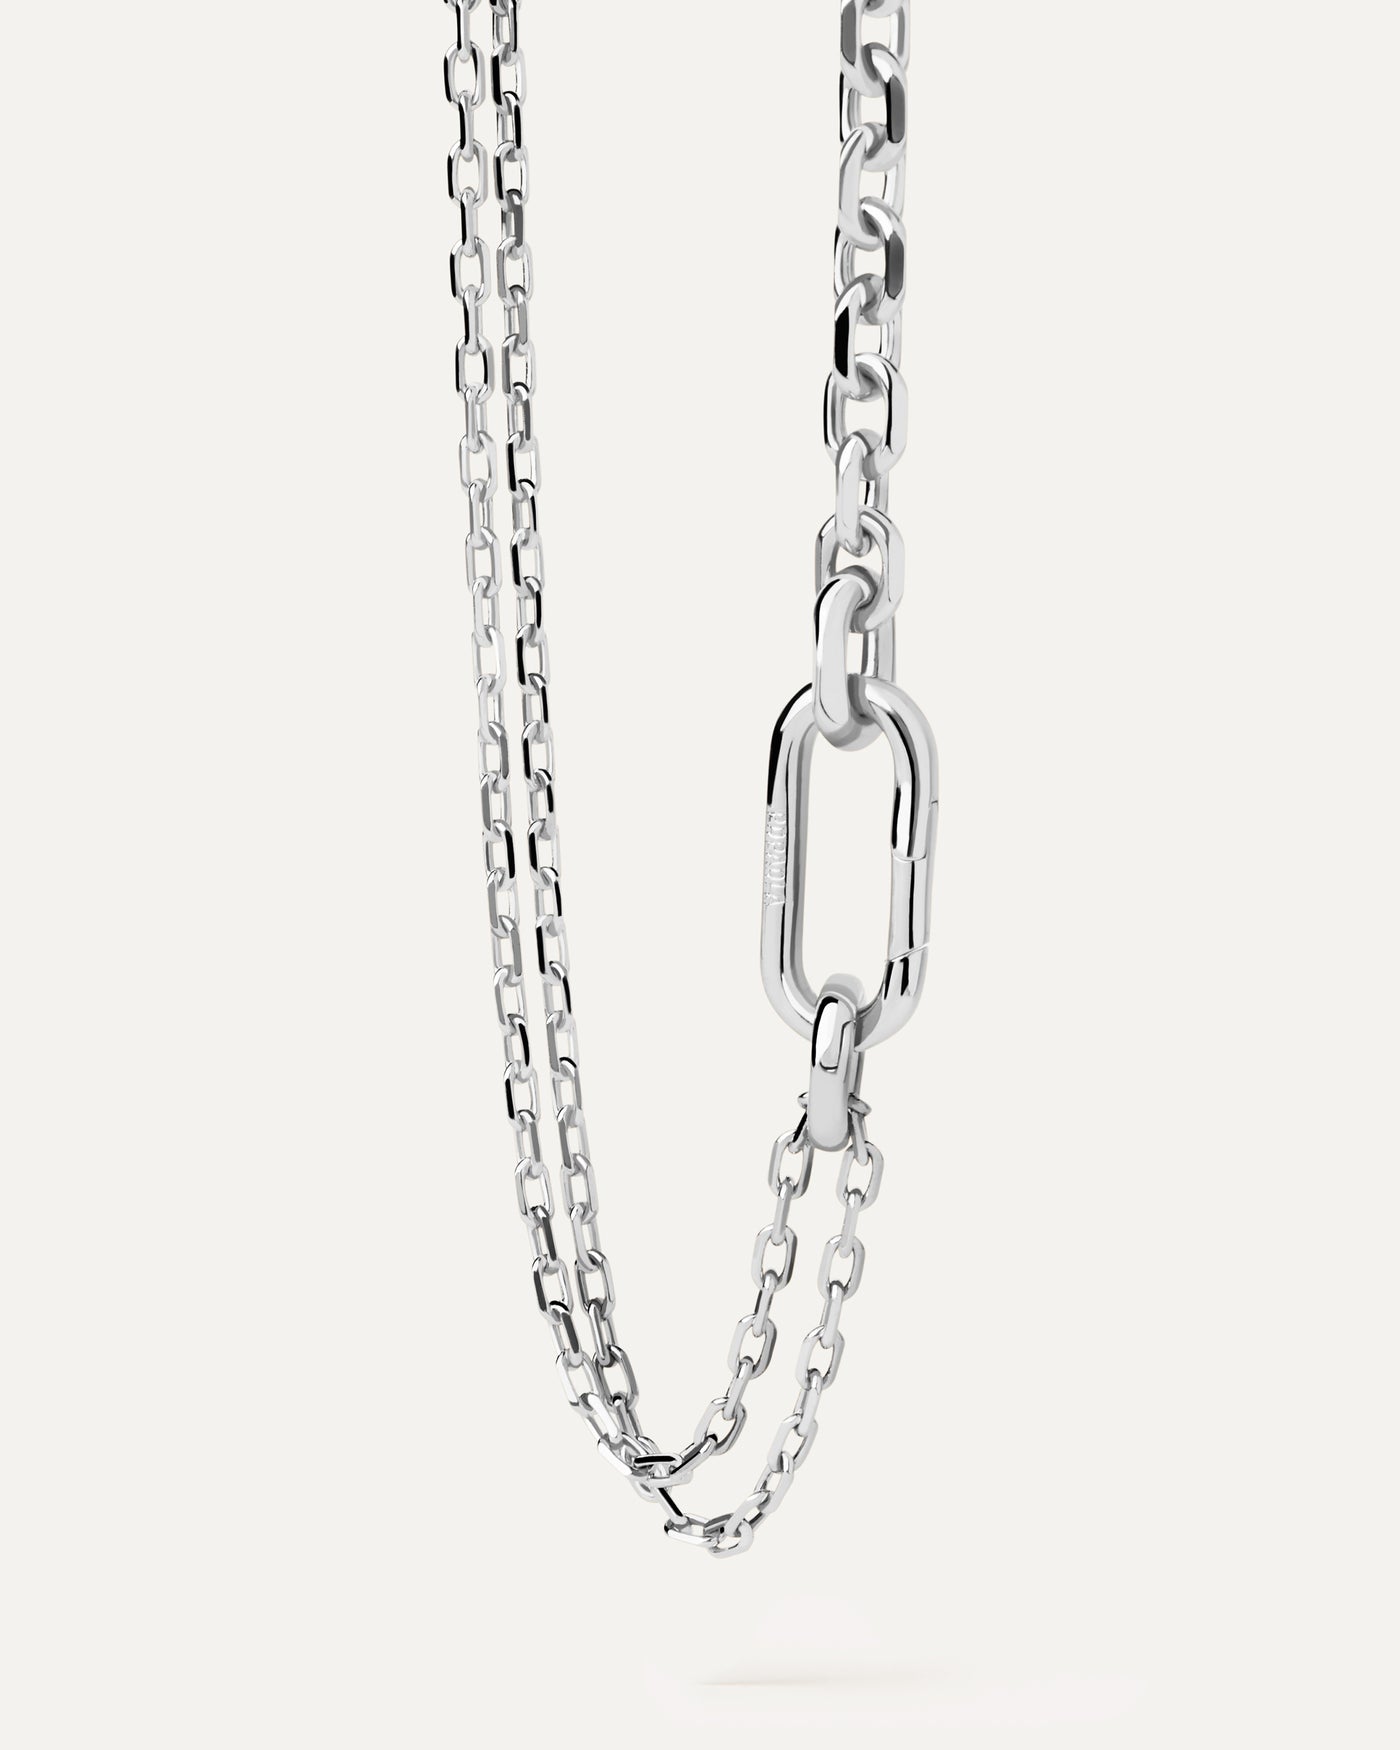 2023 Selection | Vesta Silver Chain Necklace. Double chain silver necklace with bold clasp and asymmetrical links. Get the latest arrival from PDPAOLA. Place your order safely and get this Best Seller. Free Shipping.